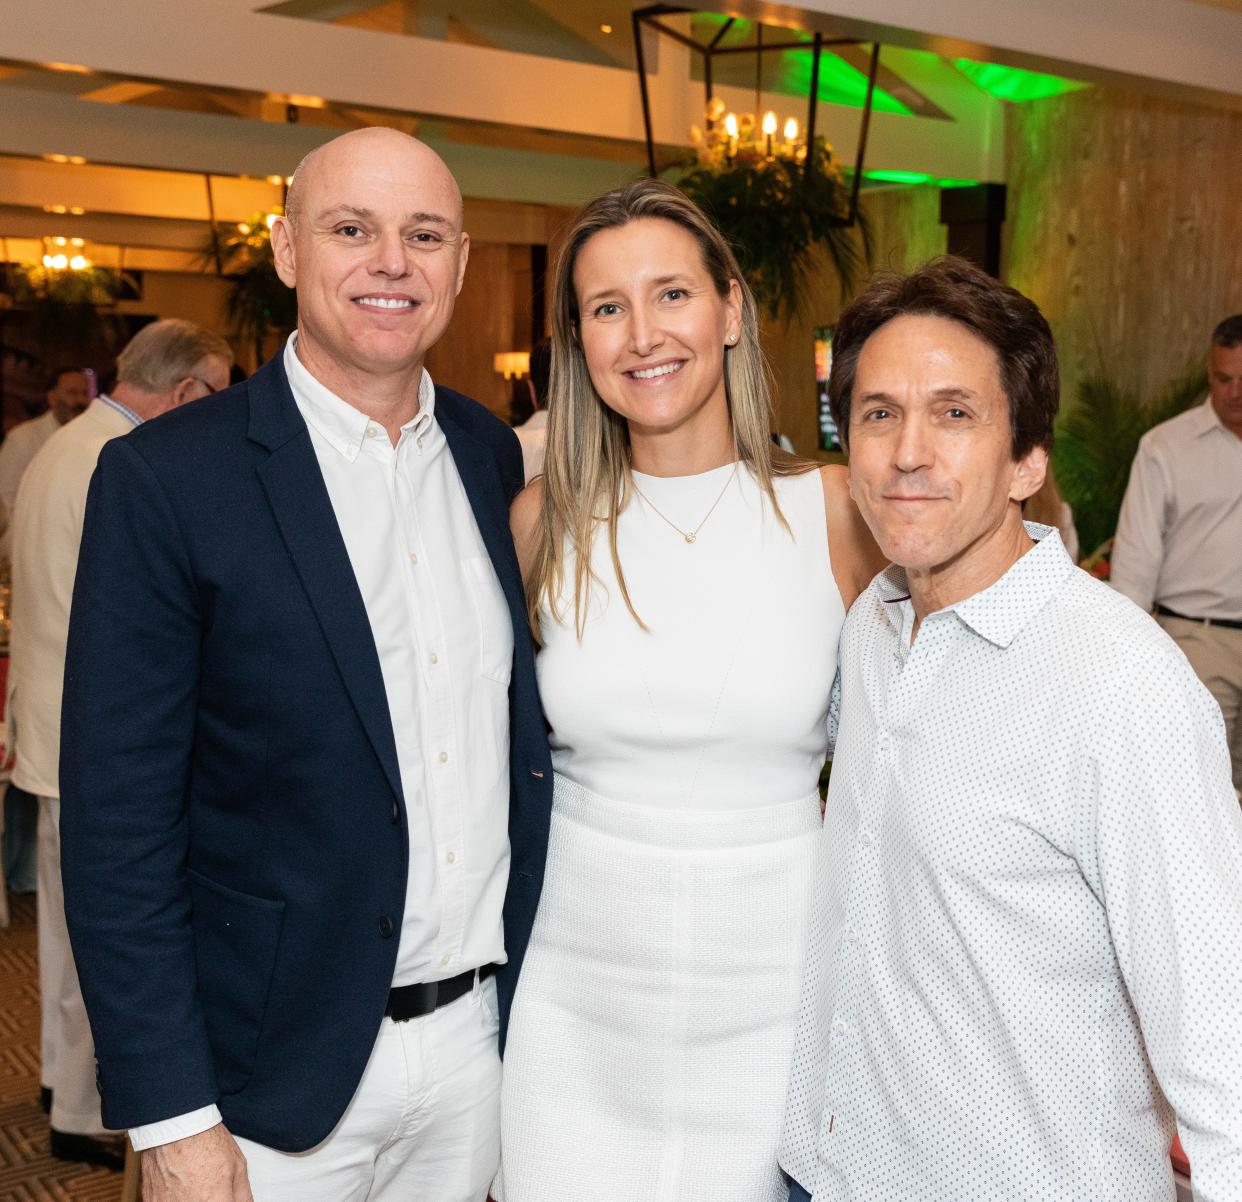 Jean Marc De Matteis with co-chairs Verena De Matteis and Mitch Albom at the annual "White Hot Night" dinner dance at the Sailfish Club to benefit the Hôpital Albert Schweitzer in Haiti in March 2023. This year's White Hot Night is set for March 23 at the Sailfish Club.